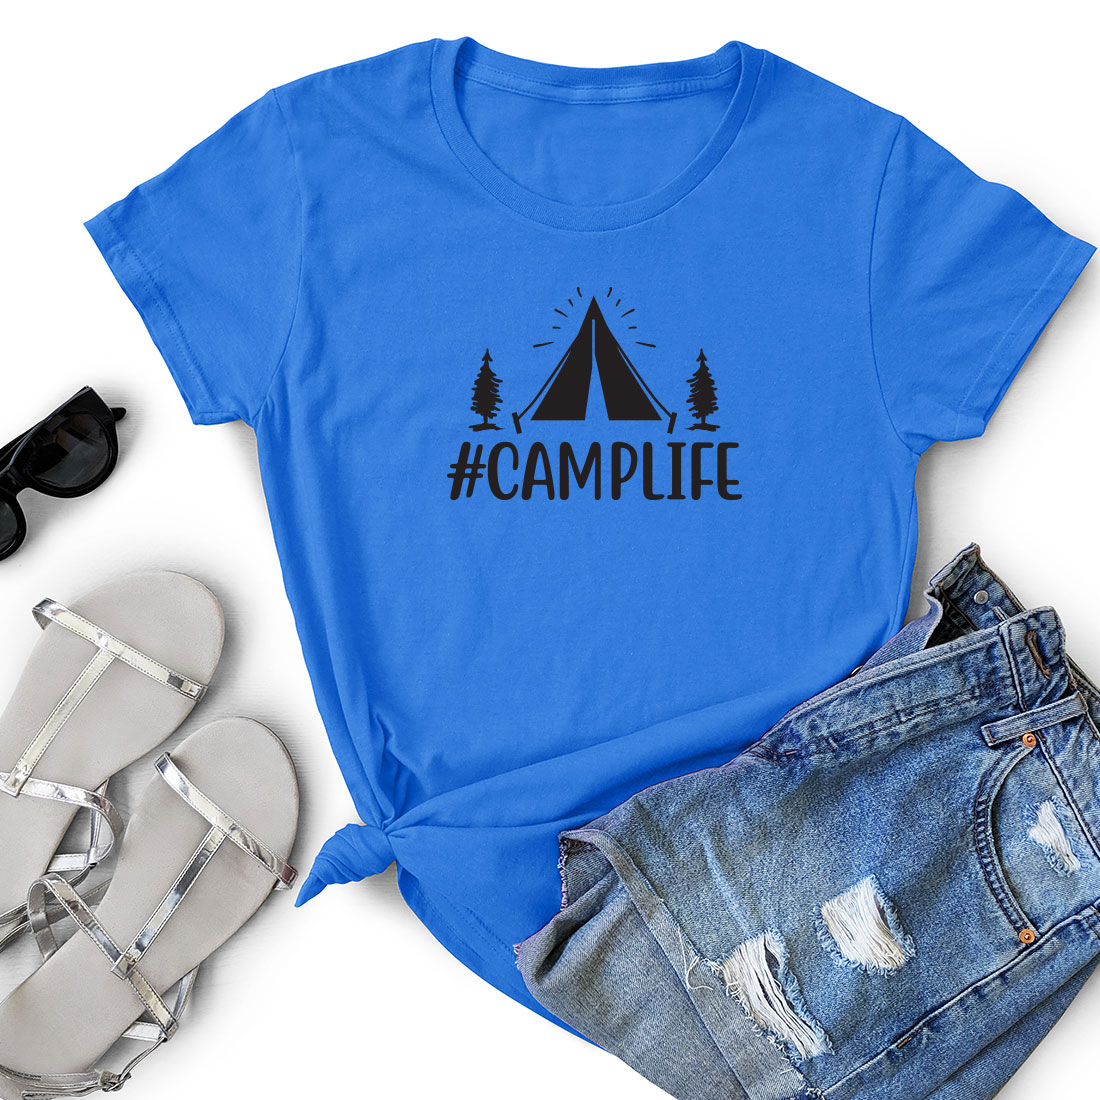 T - shirt that says camplife next to a pair of shorts.